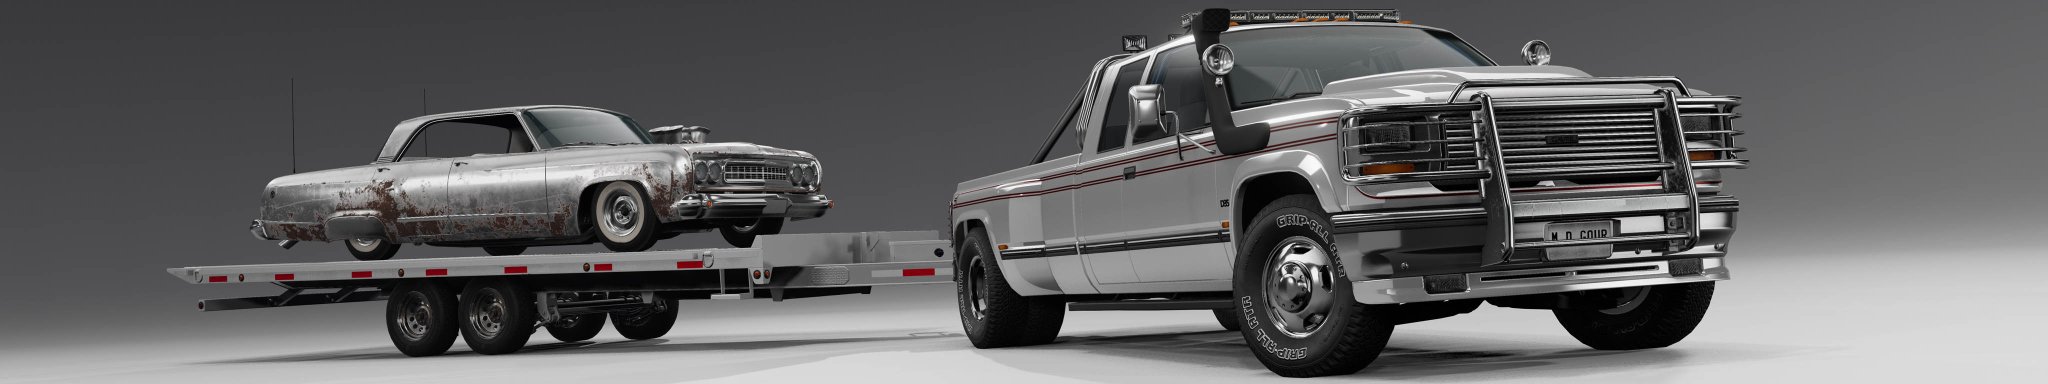 1 BeamNG SHOWROOM DUALLY with TRAILER and Bluebuck SOOT SLED copy.jpg